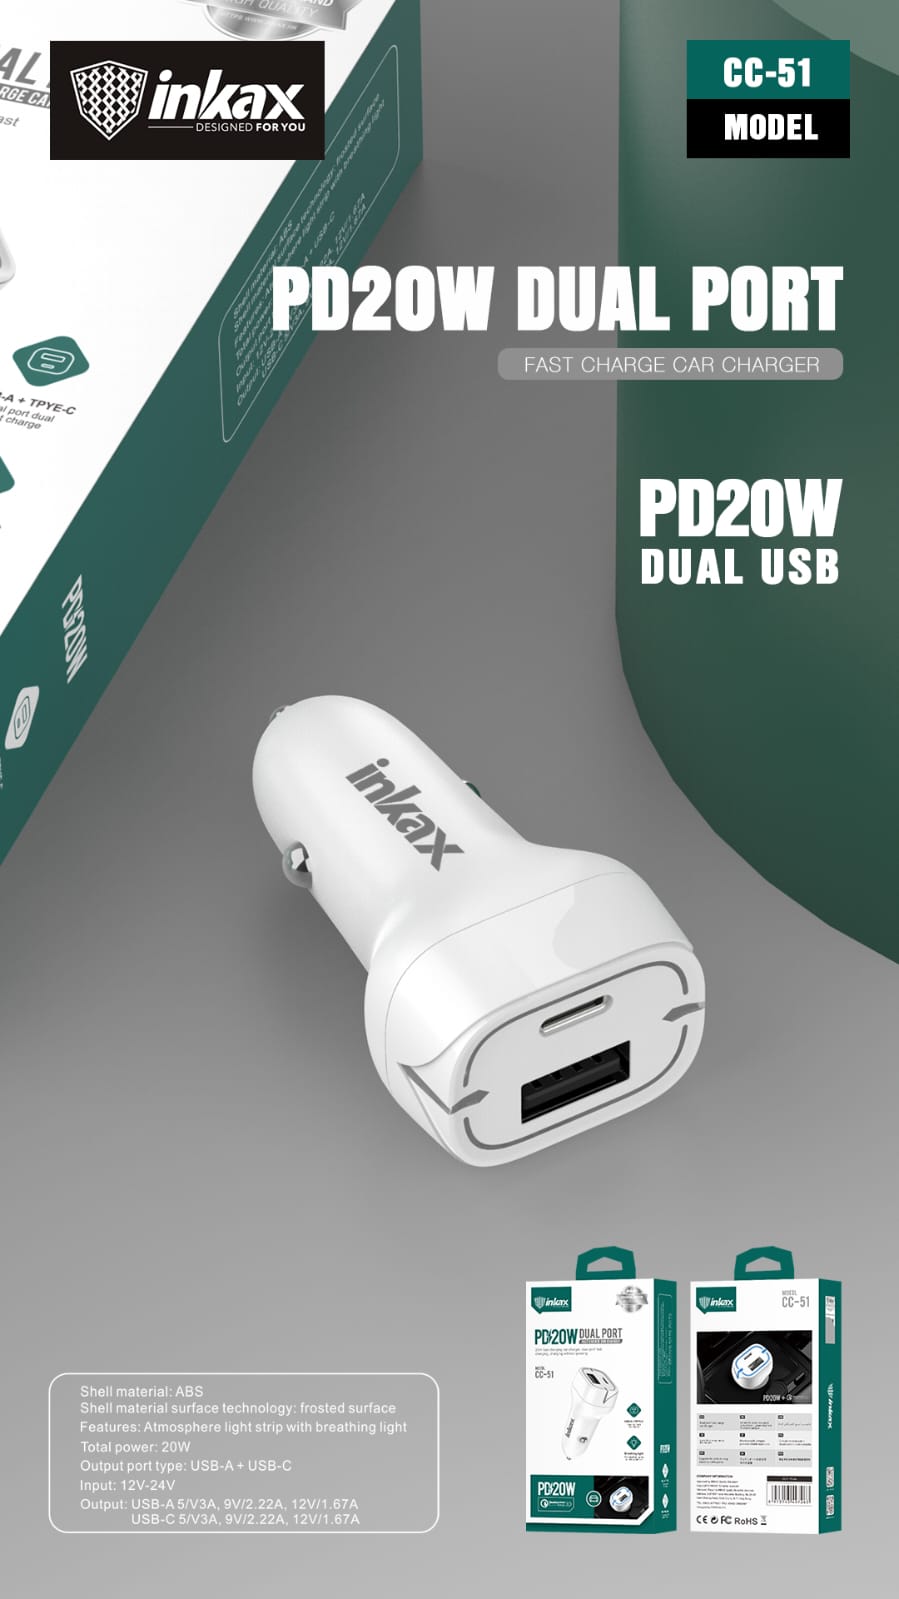 Inkax PD20W Dual Port Fast Charge Car Charger CC-51